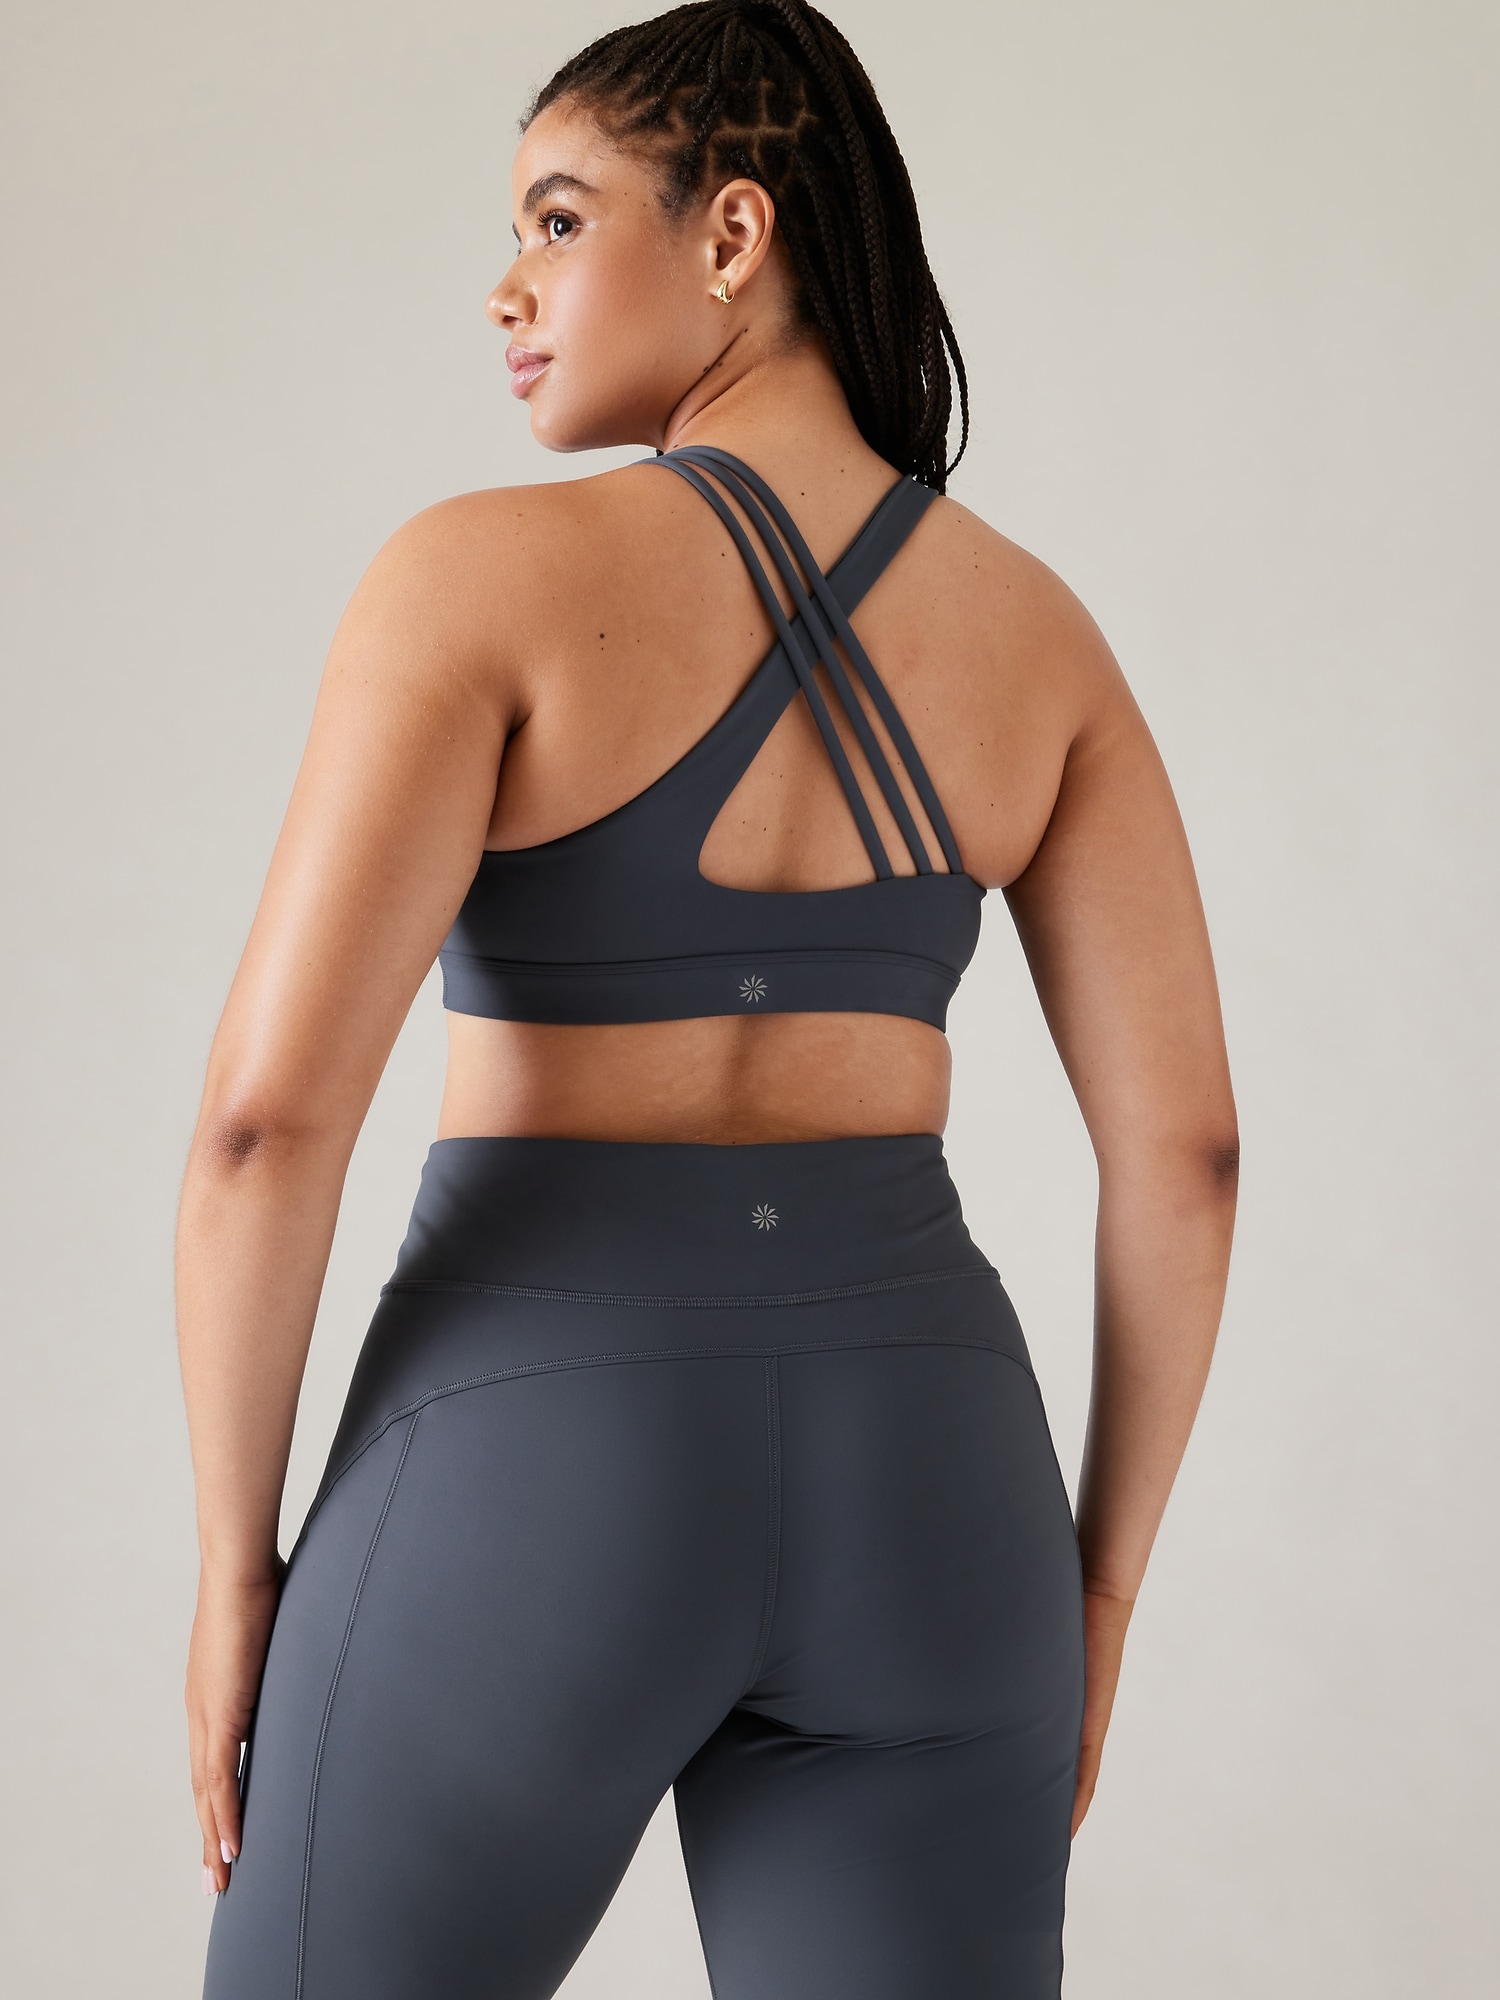 Extra 20% Off Select Styles Tight Unlined Sports Bras.